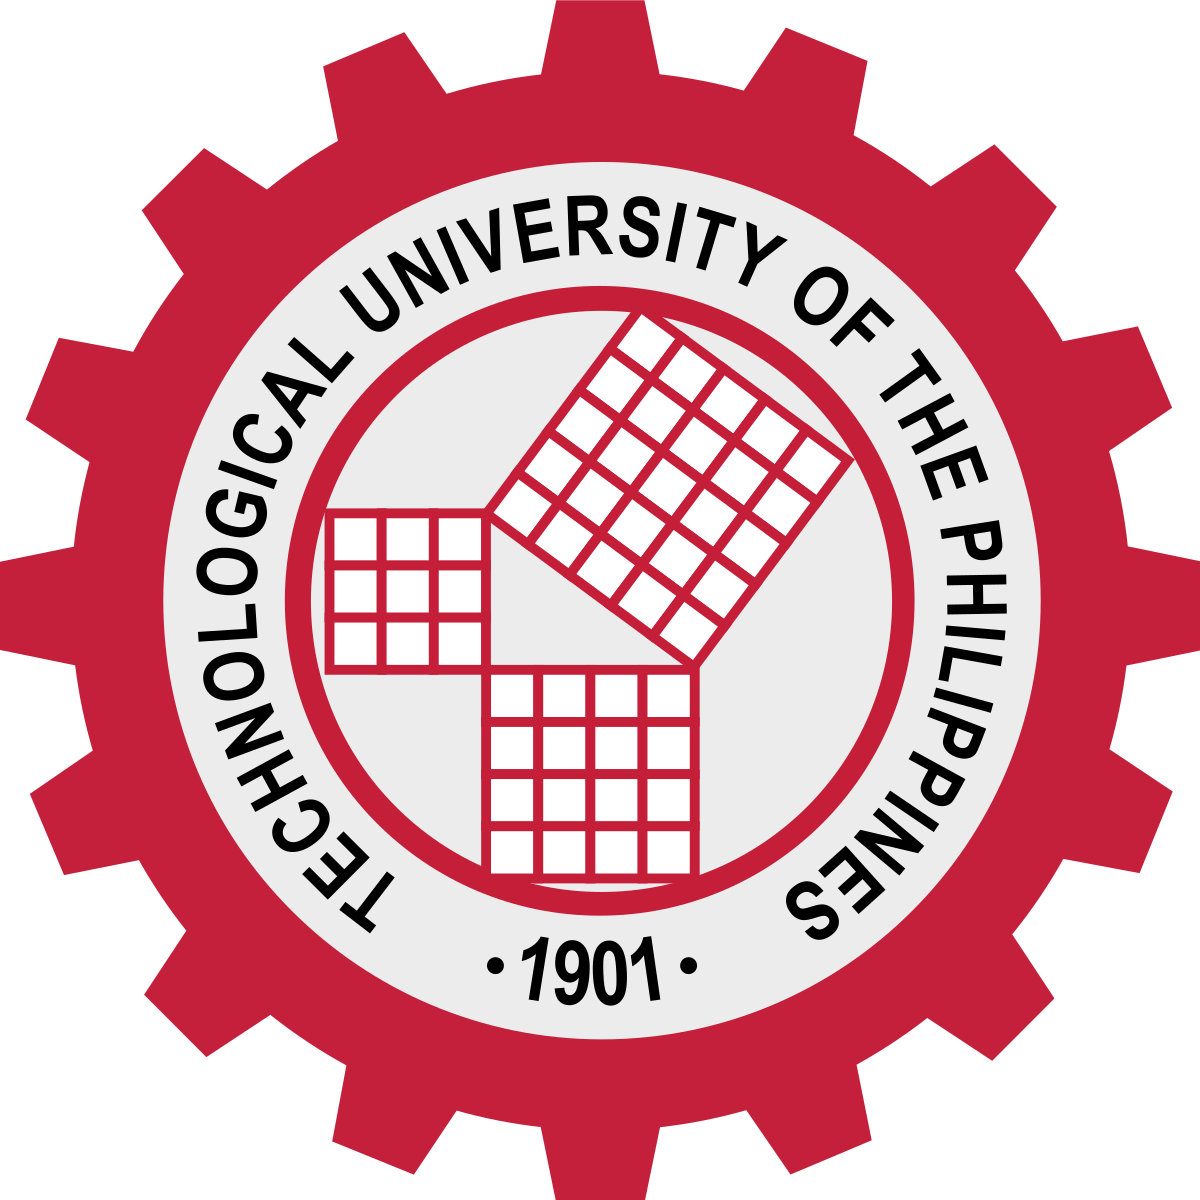 New Set of Vice Presidents of Technological University of the Philippines